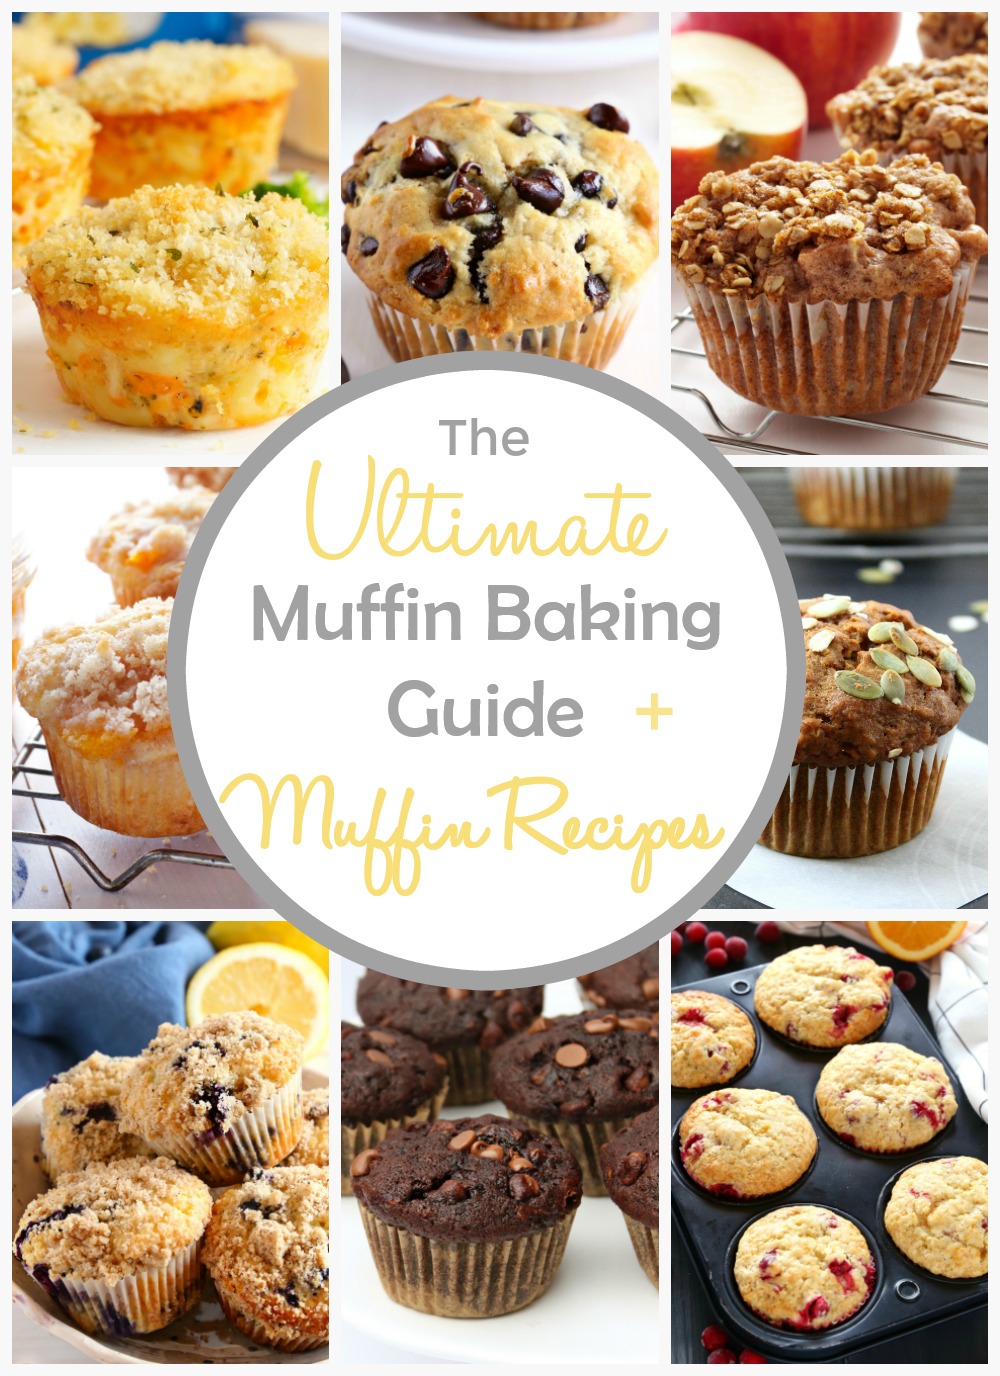 These are our best muffin recipes and our ULTIMATE GUIDE to baking perfect muffins! In this post, we'll cover how to prevent dense muffins, muffin pan conversion, creating perfect muffin tops, and more! #muffinrecipes #bakingtips via @busybakerblog